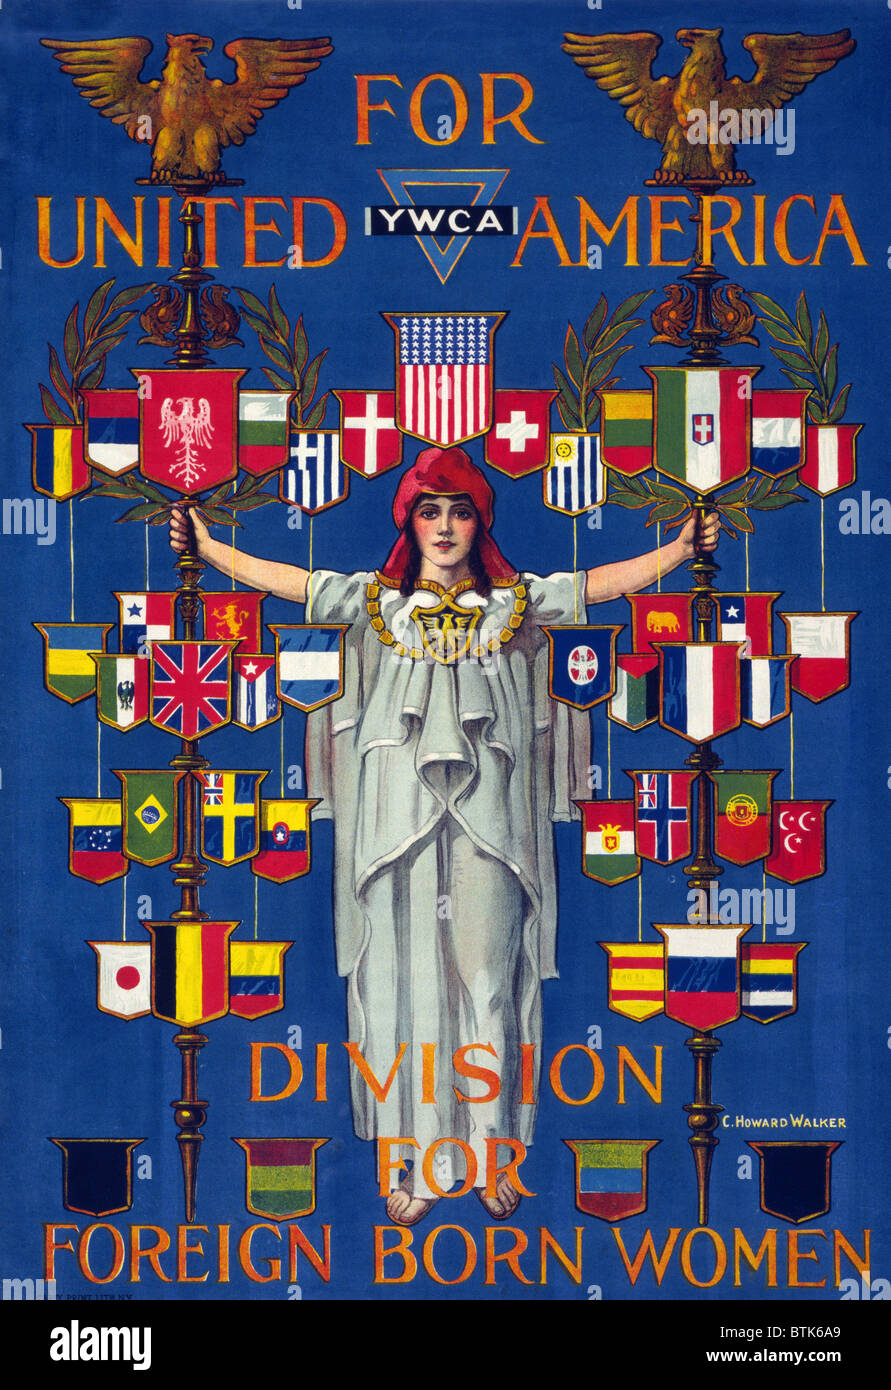 Immigration. 'For united America, YWCA division for foreign born women' Poster shows the figure of Columbia surrounded by flags Stock Photo